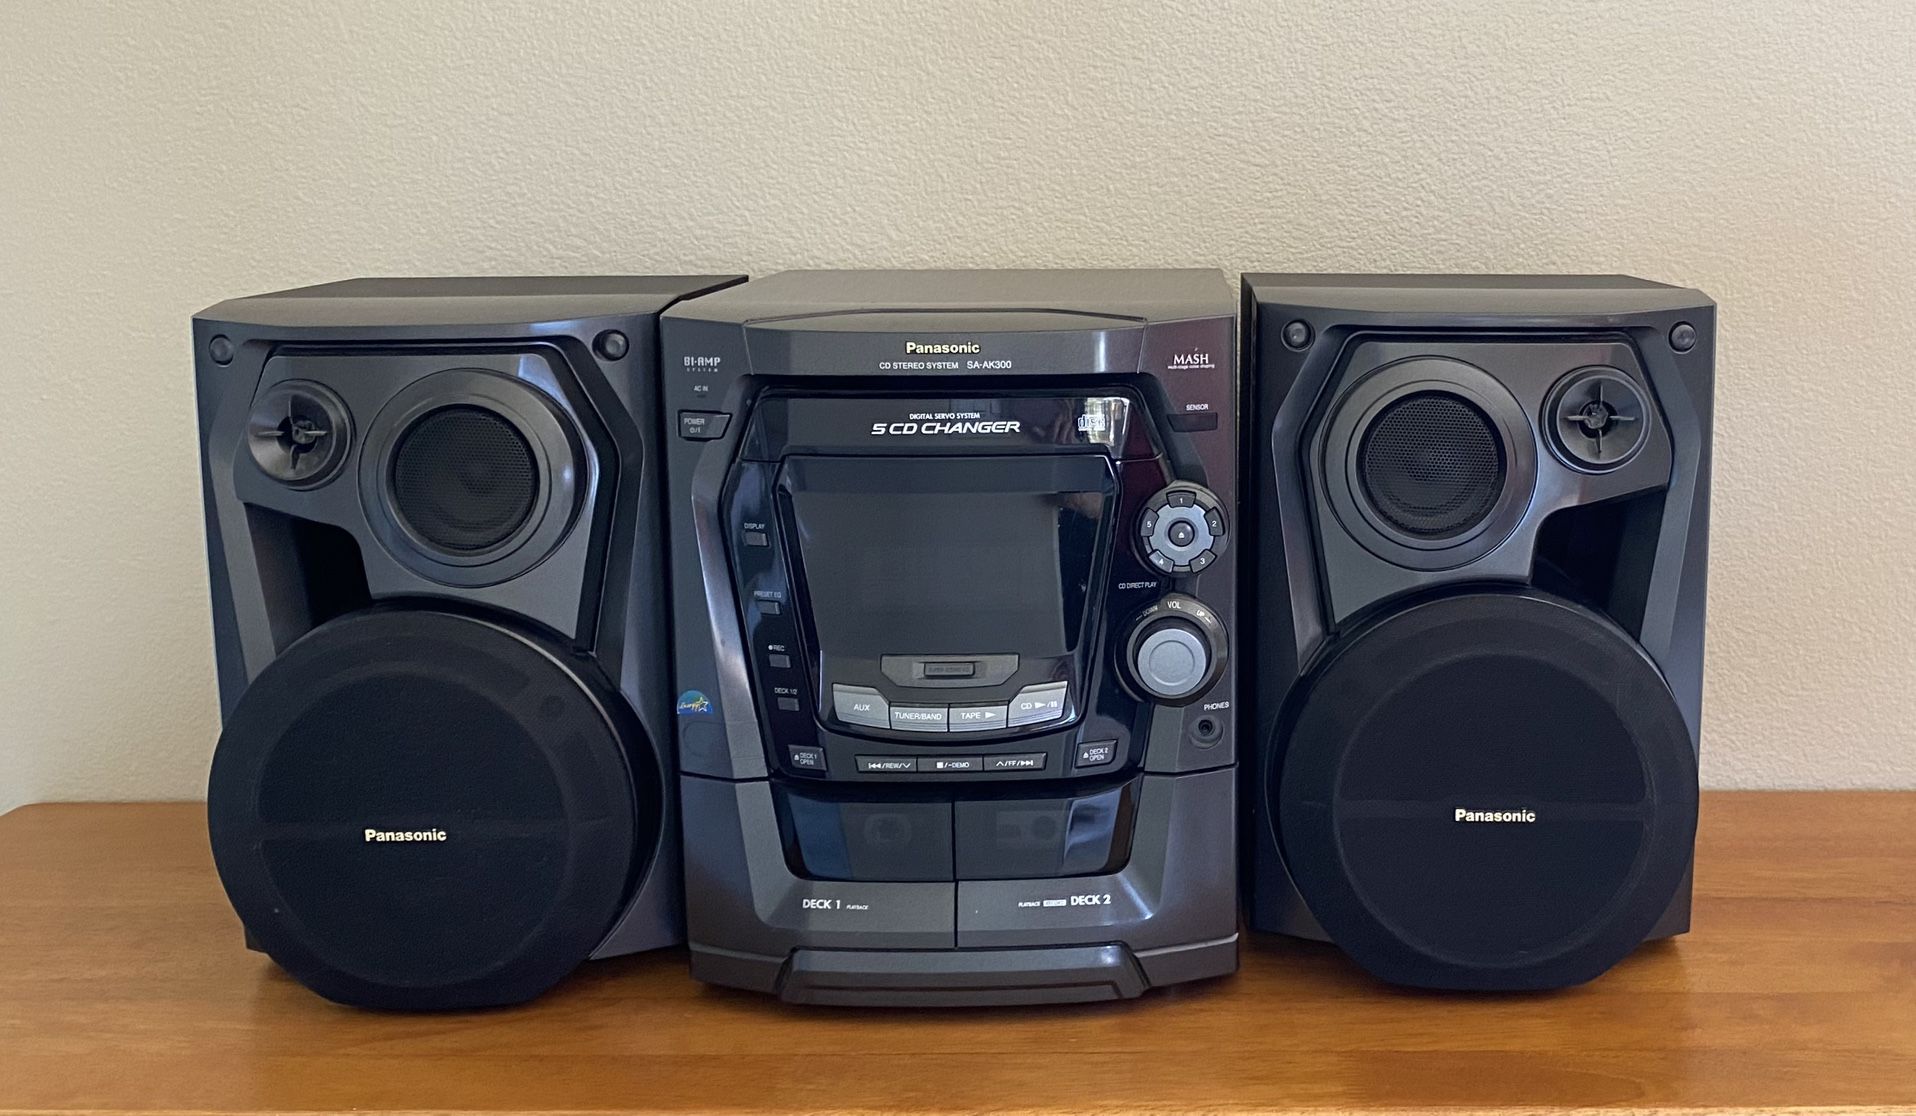 PANASONIC 5 CD AM/FM STEREO SYSTEM  - 165 WATTS  - SOUNDS AWESOME! 